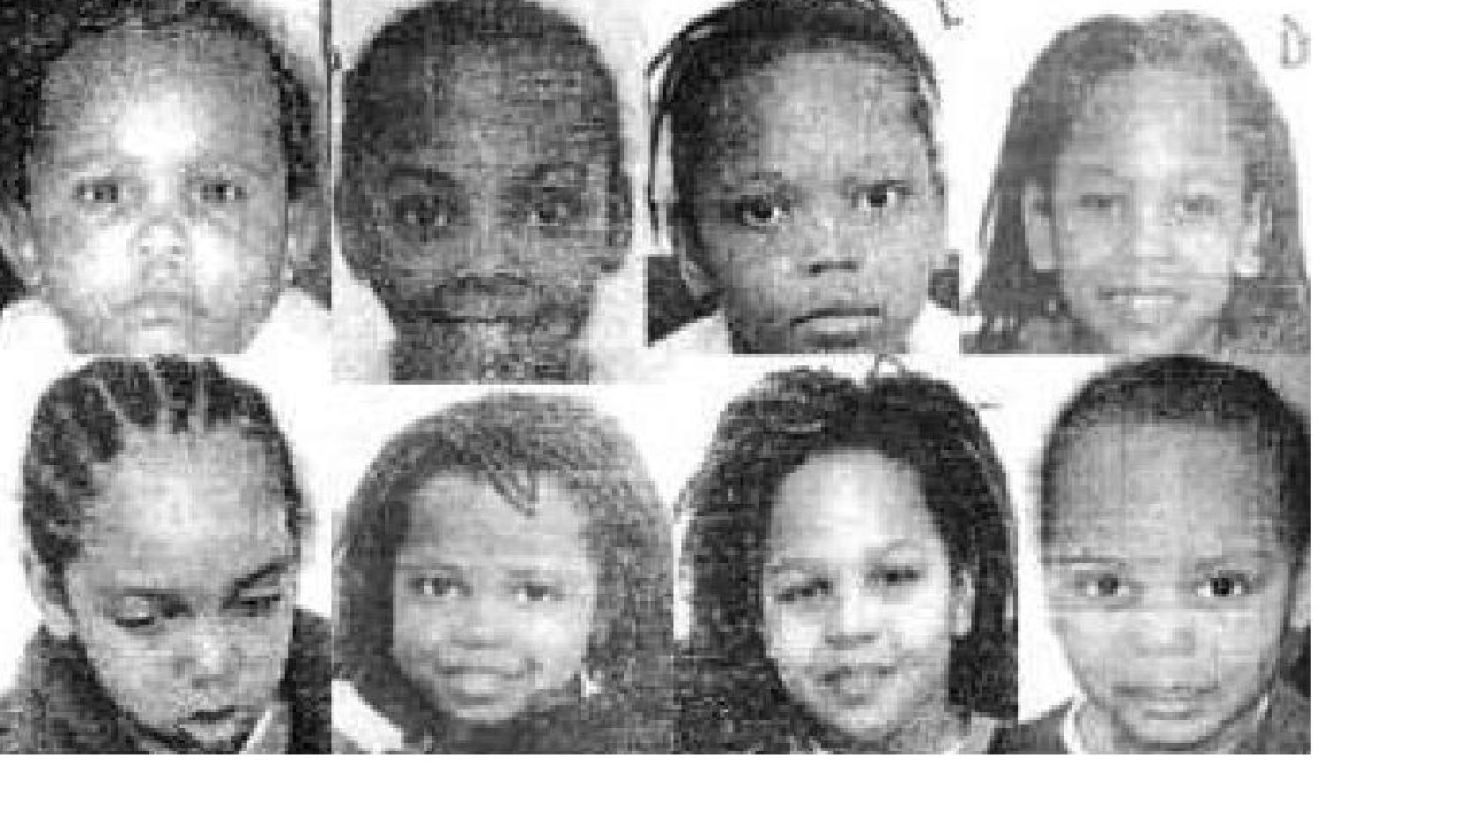 The missing children range in age from 11 months to 11 years old. They may be traveling in a black 1996 Chevrolet Suburban.